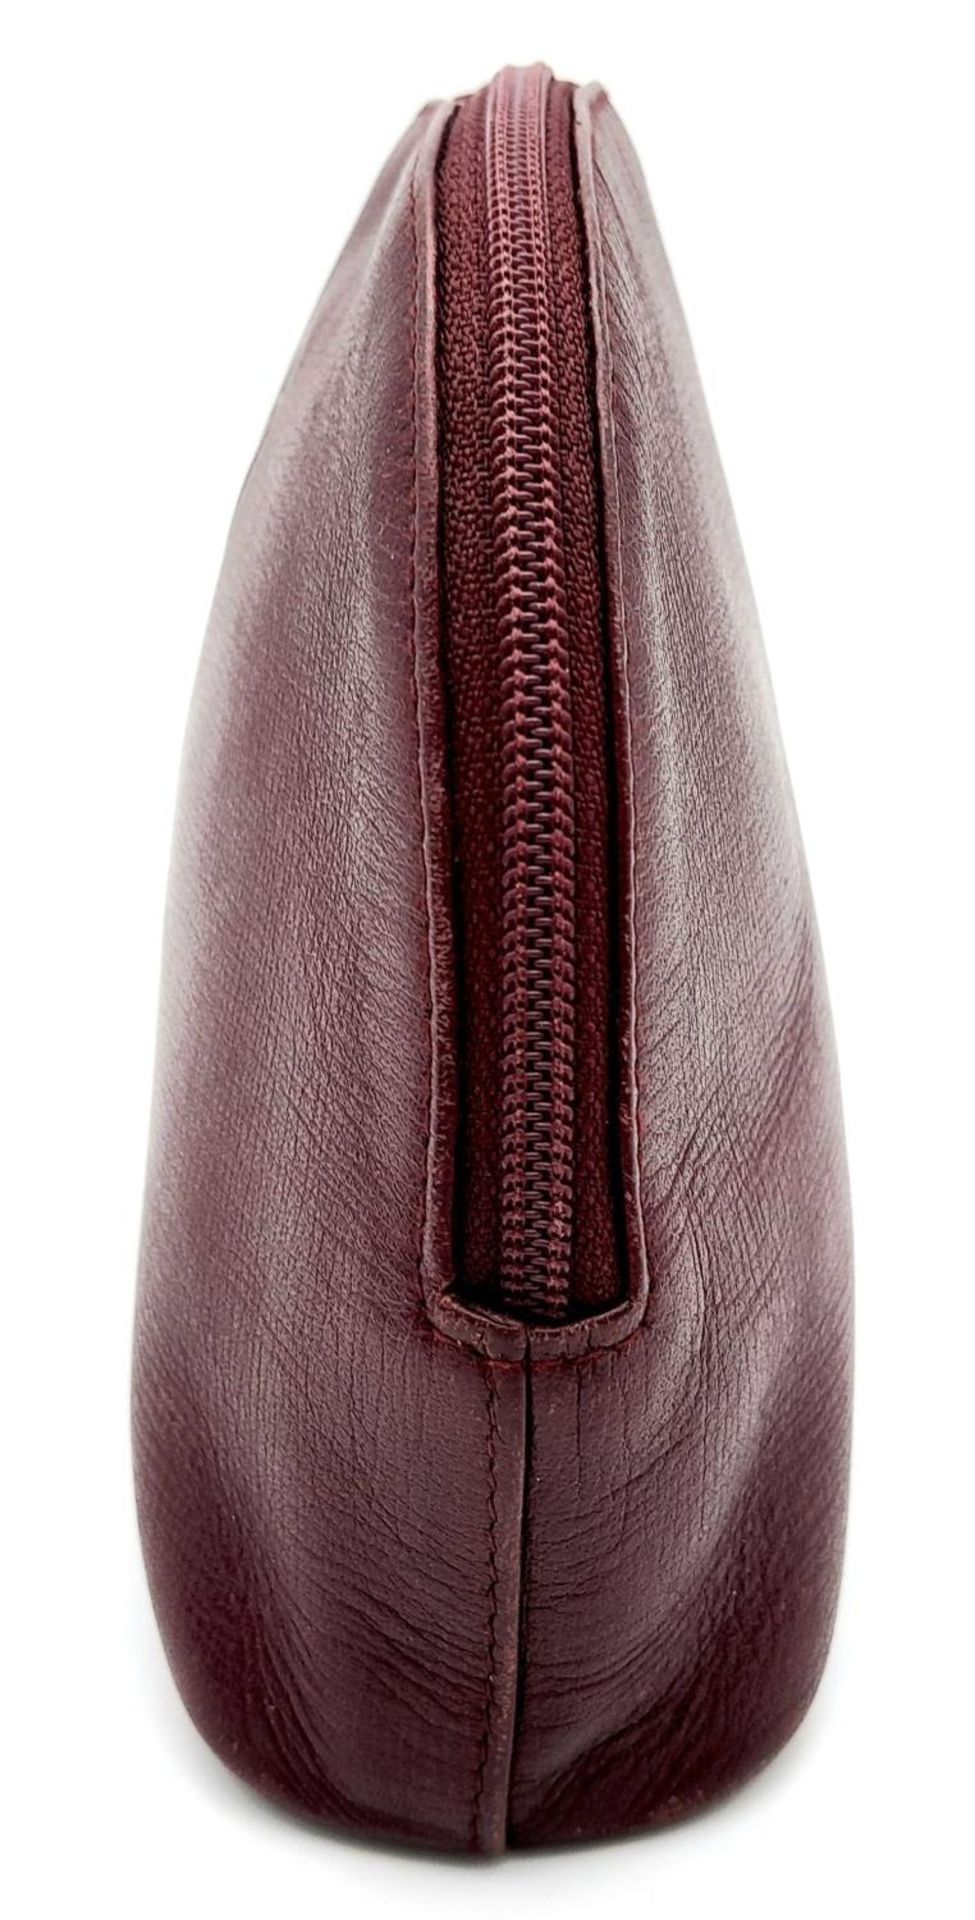 A Vintage Cartier Burgundy Pouch. Leather exterior with zip top closure. Burgundy canvas interior. - Image 2 of 11